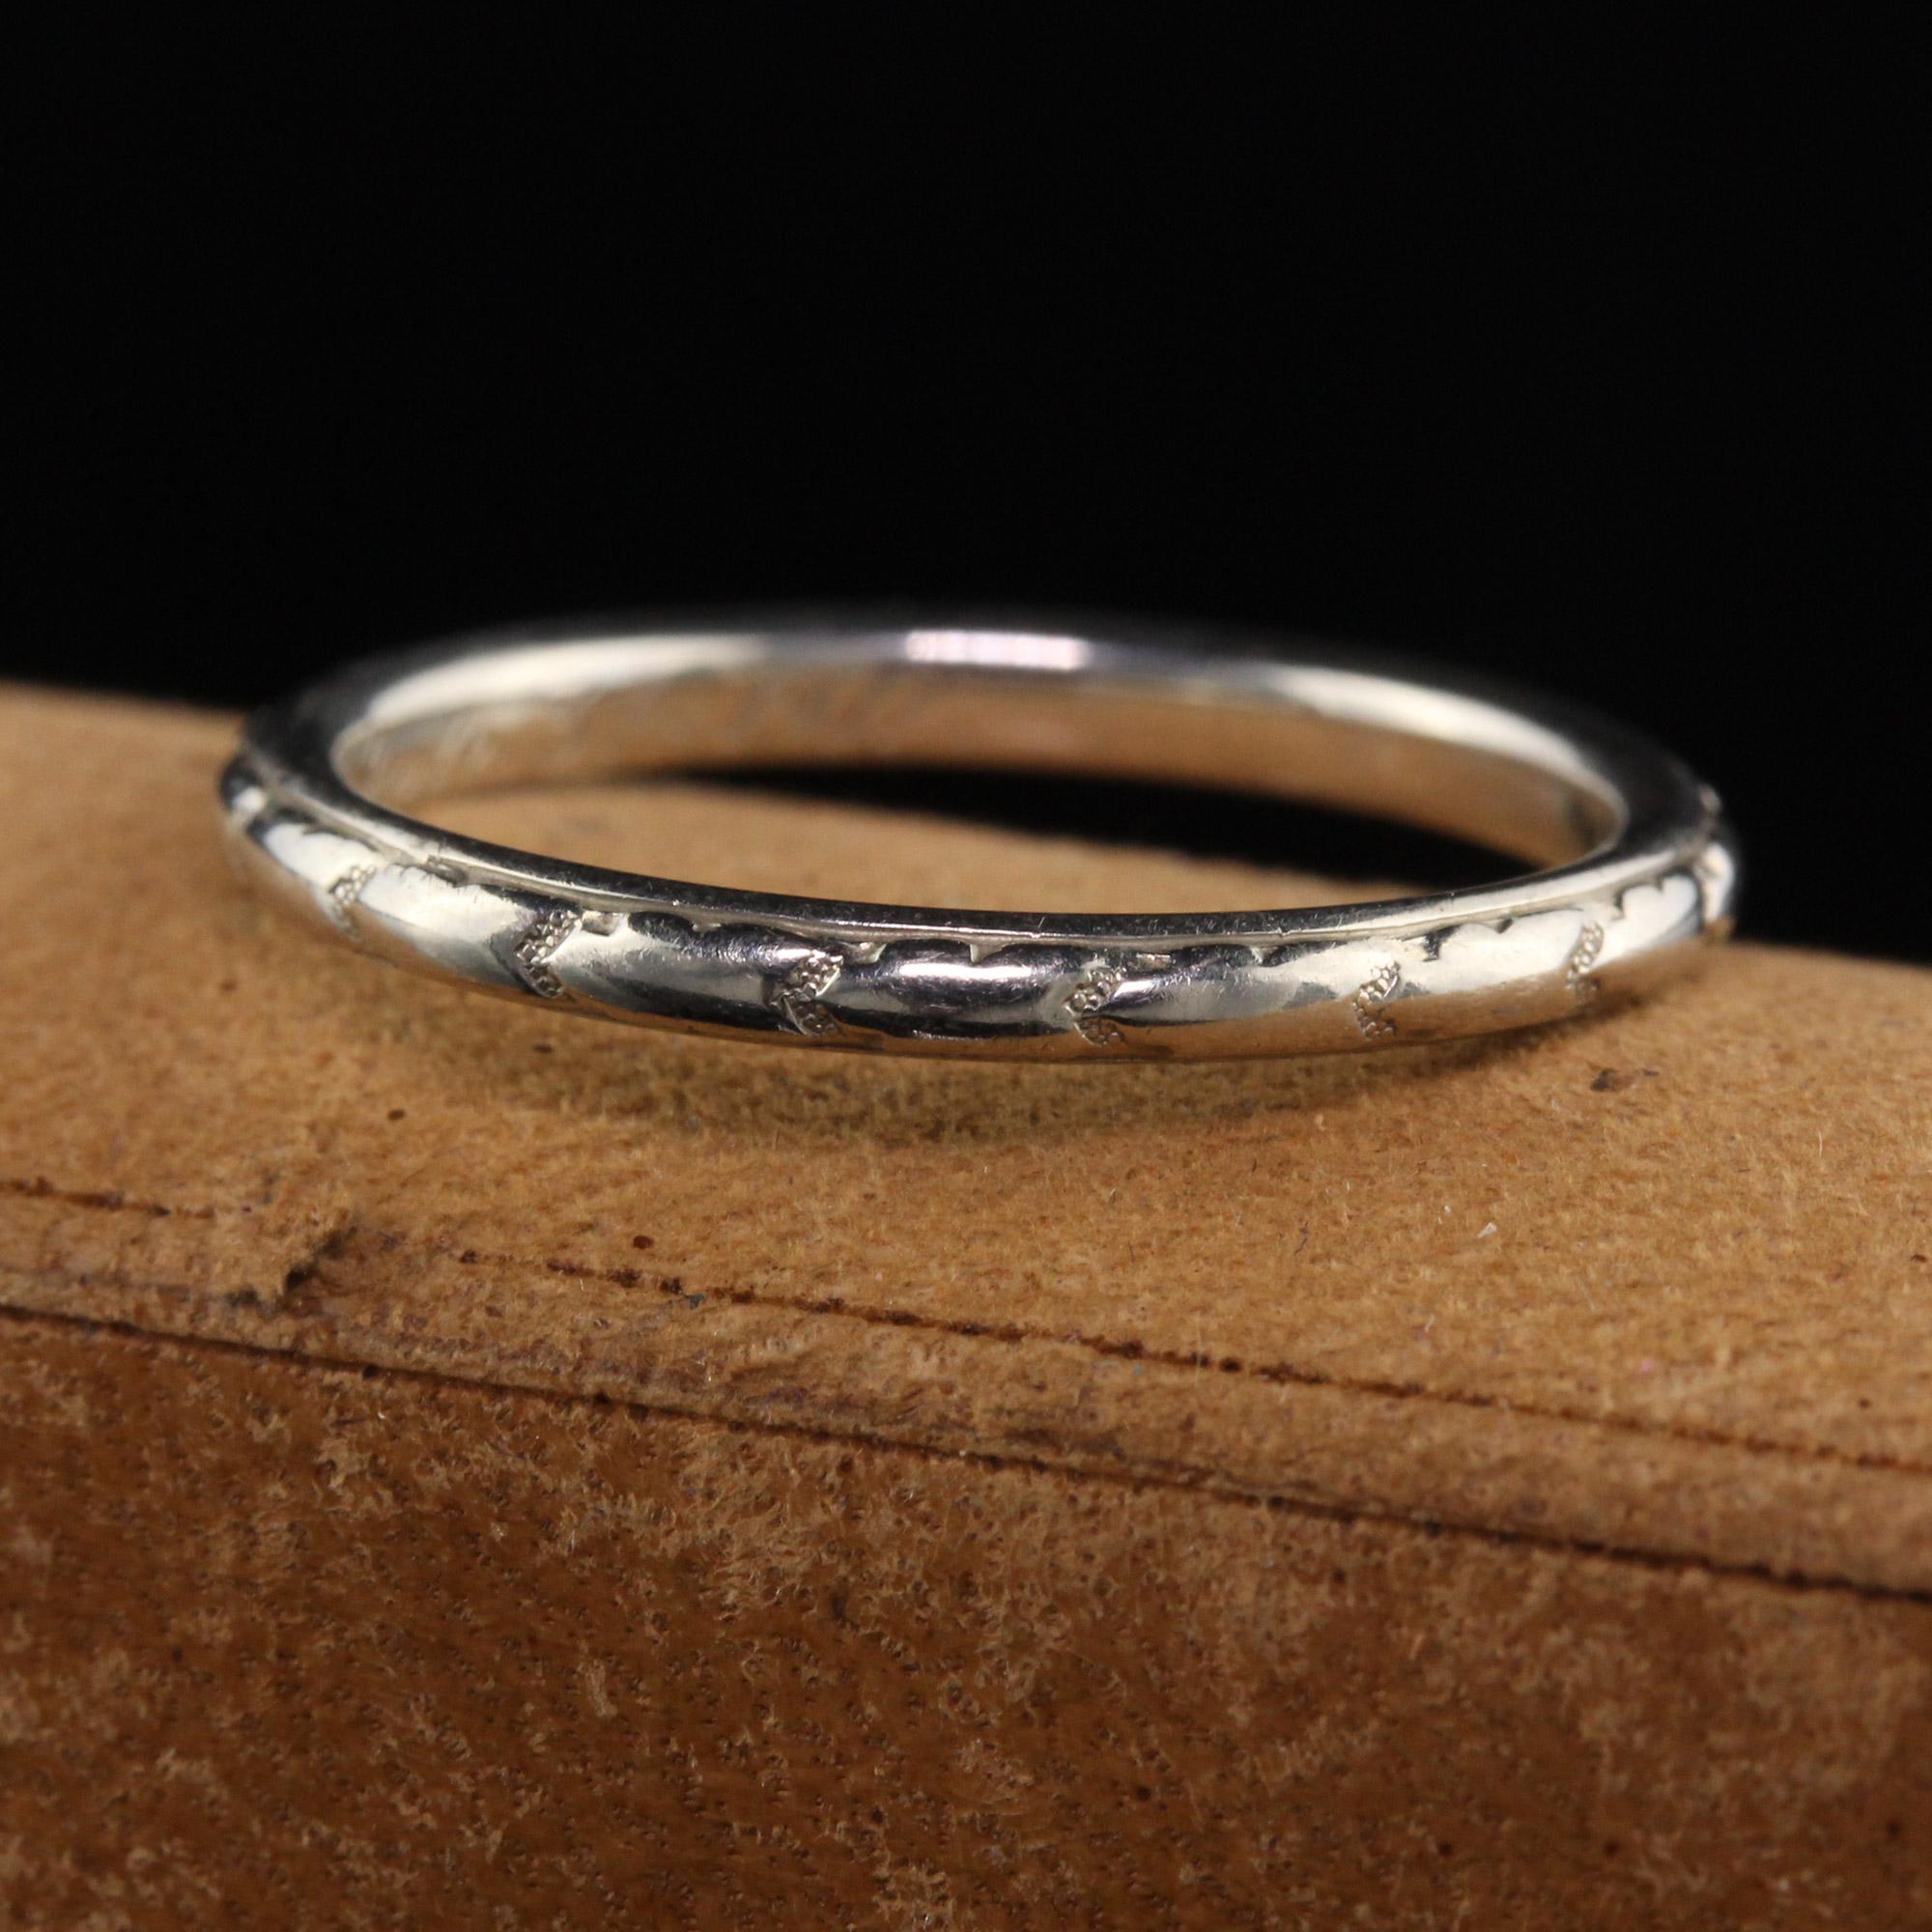 Beautiful Antique Art Deco Orange Blossom 18K White Gold Engraved Wedding Band. This classic wedding band is made by Orange Blossom and crafted in 18K white gold. It has engravings going around the entire ring and inside of the ring is engraved 